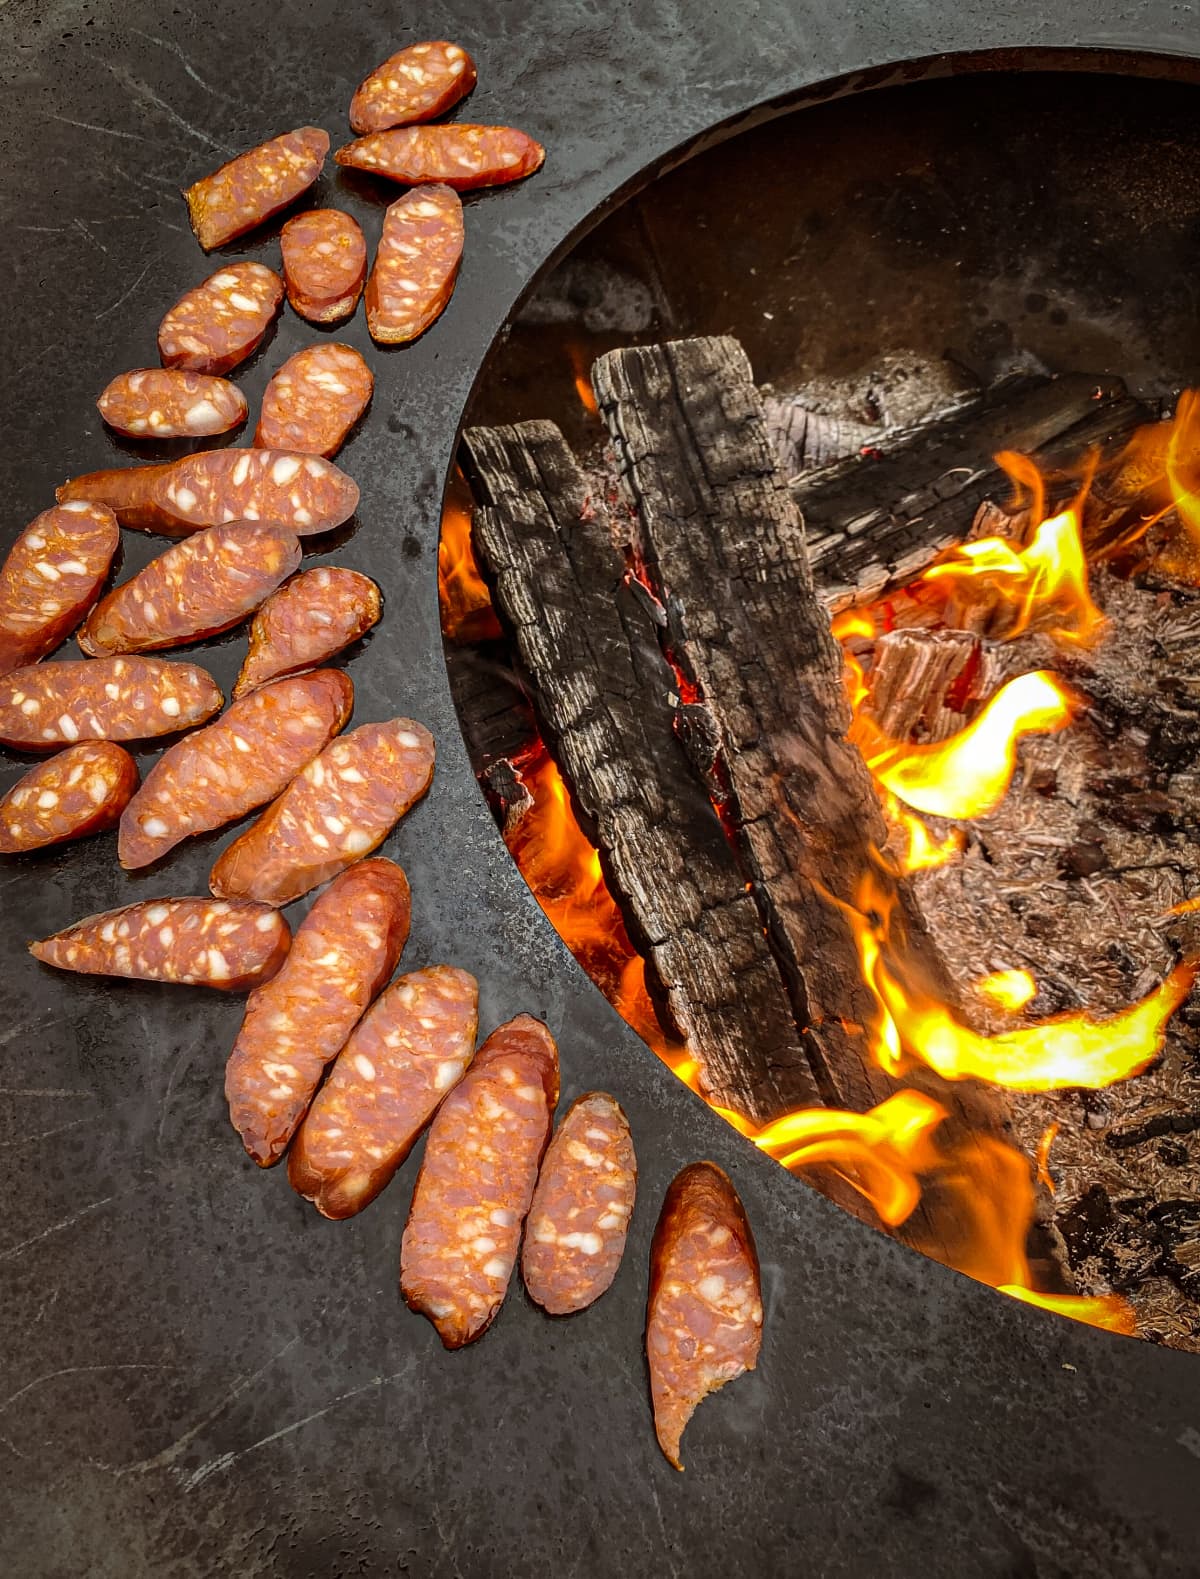 Chorizo grilled on a wood fire